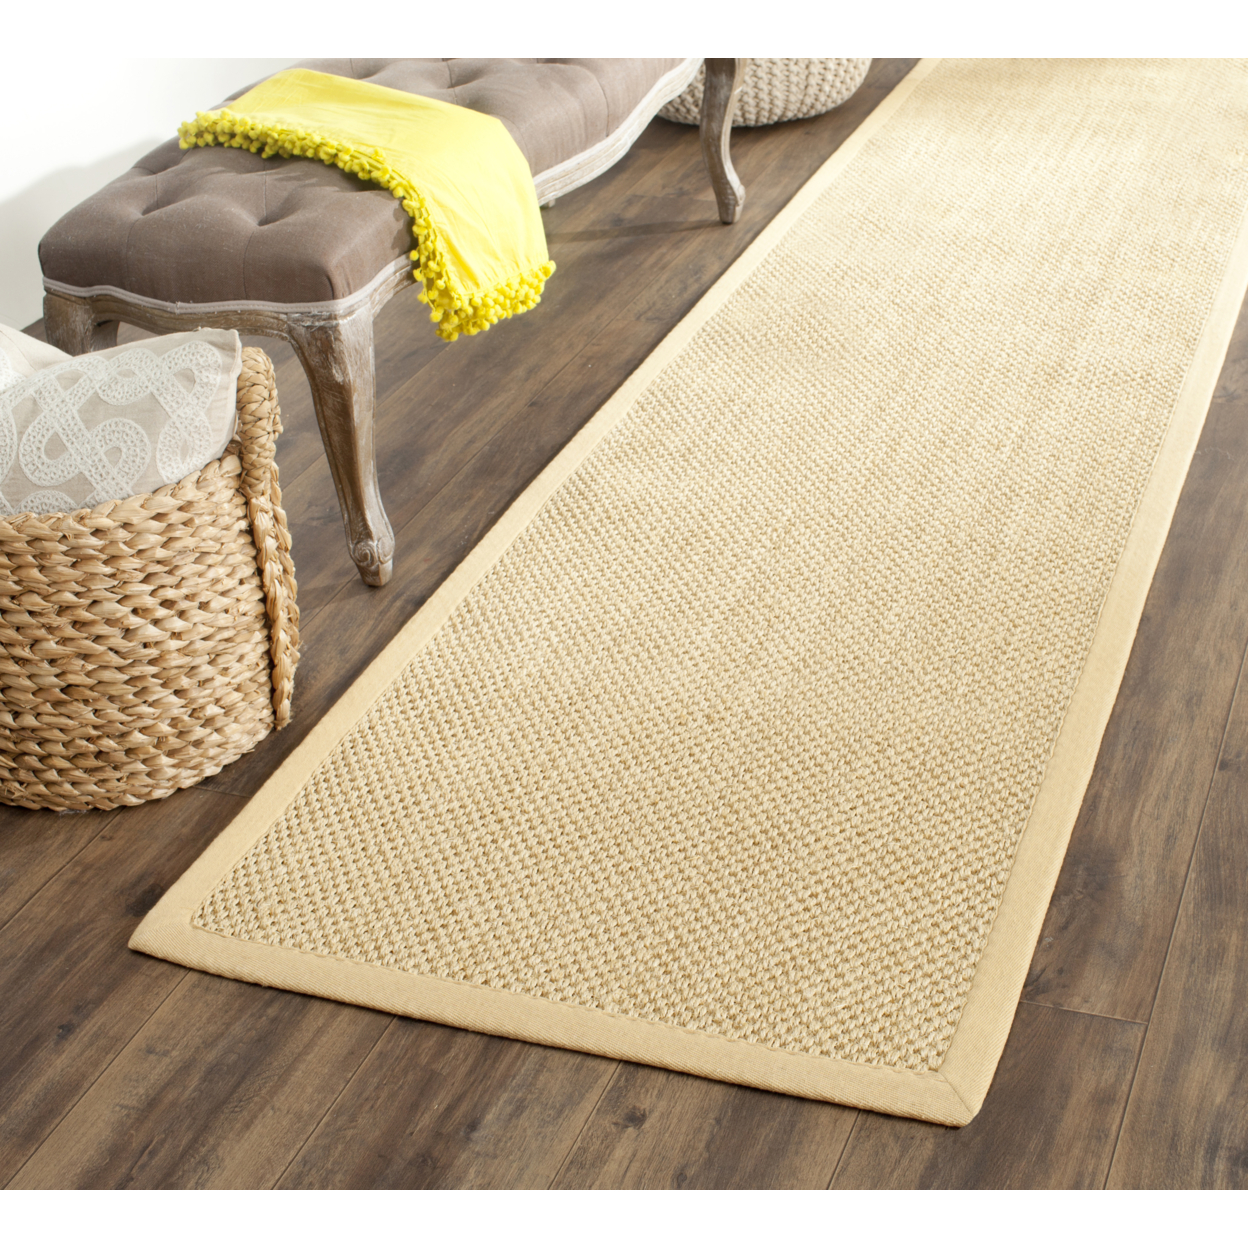 SAFAVIEH Natural Fiber Collection NF443A Maize/Wheat Rug - 2' 6 X 16'